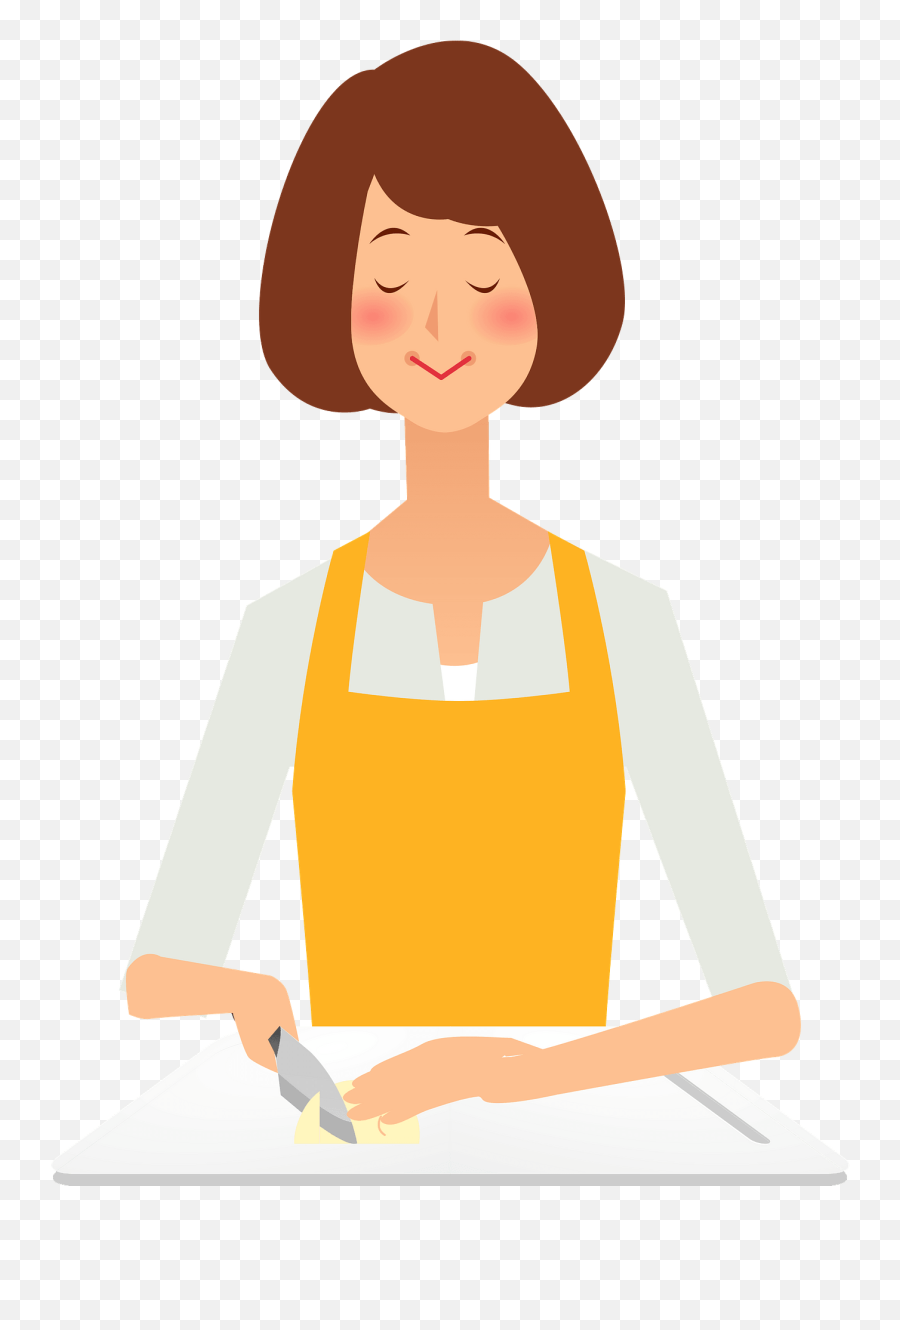 Mary Woman Is Using A Kitchen Knife Clipart Free Download Emoji,Chef Knife Clipart